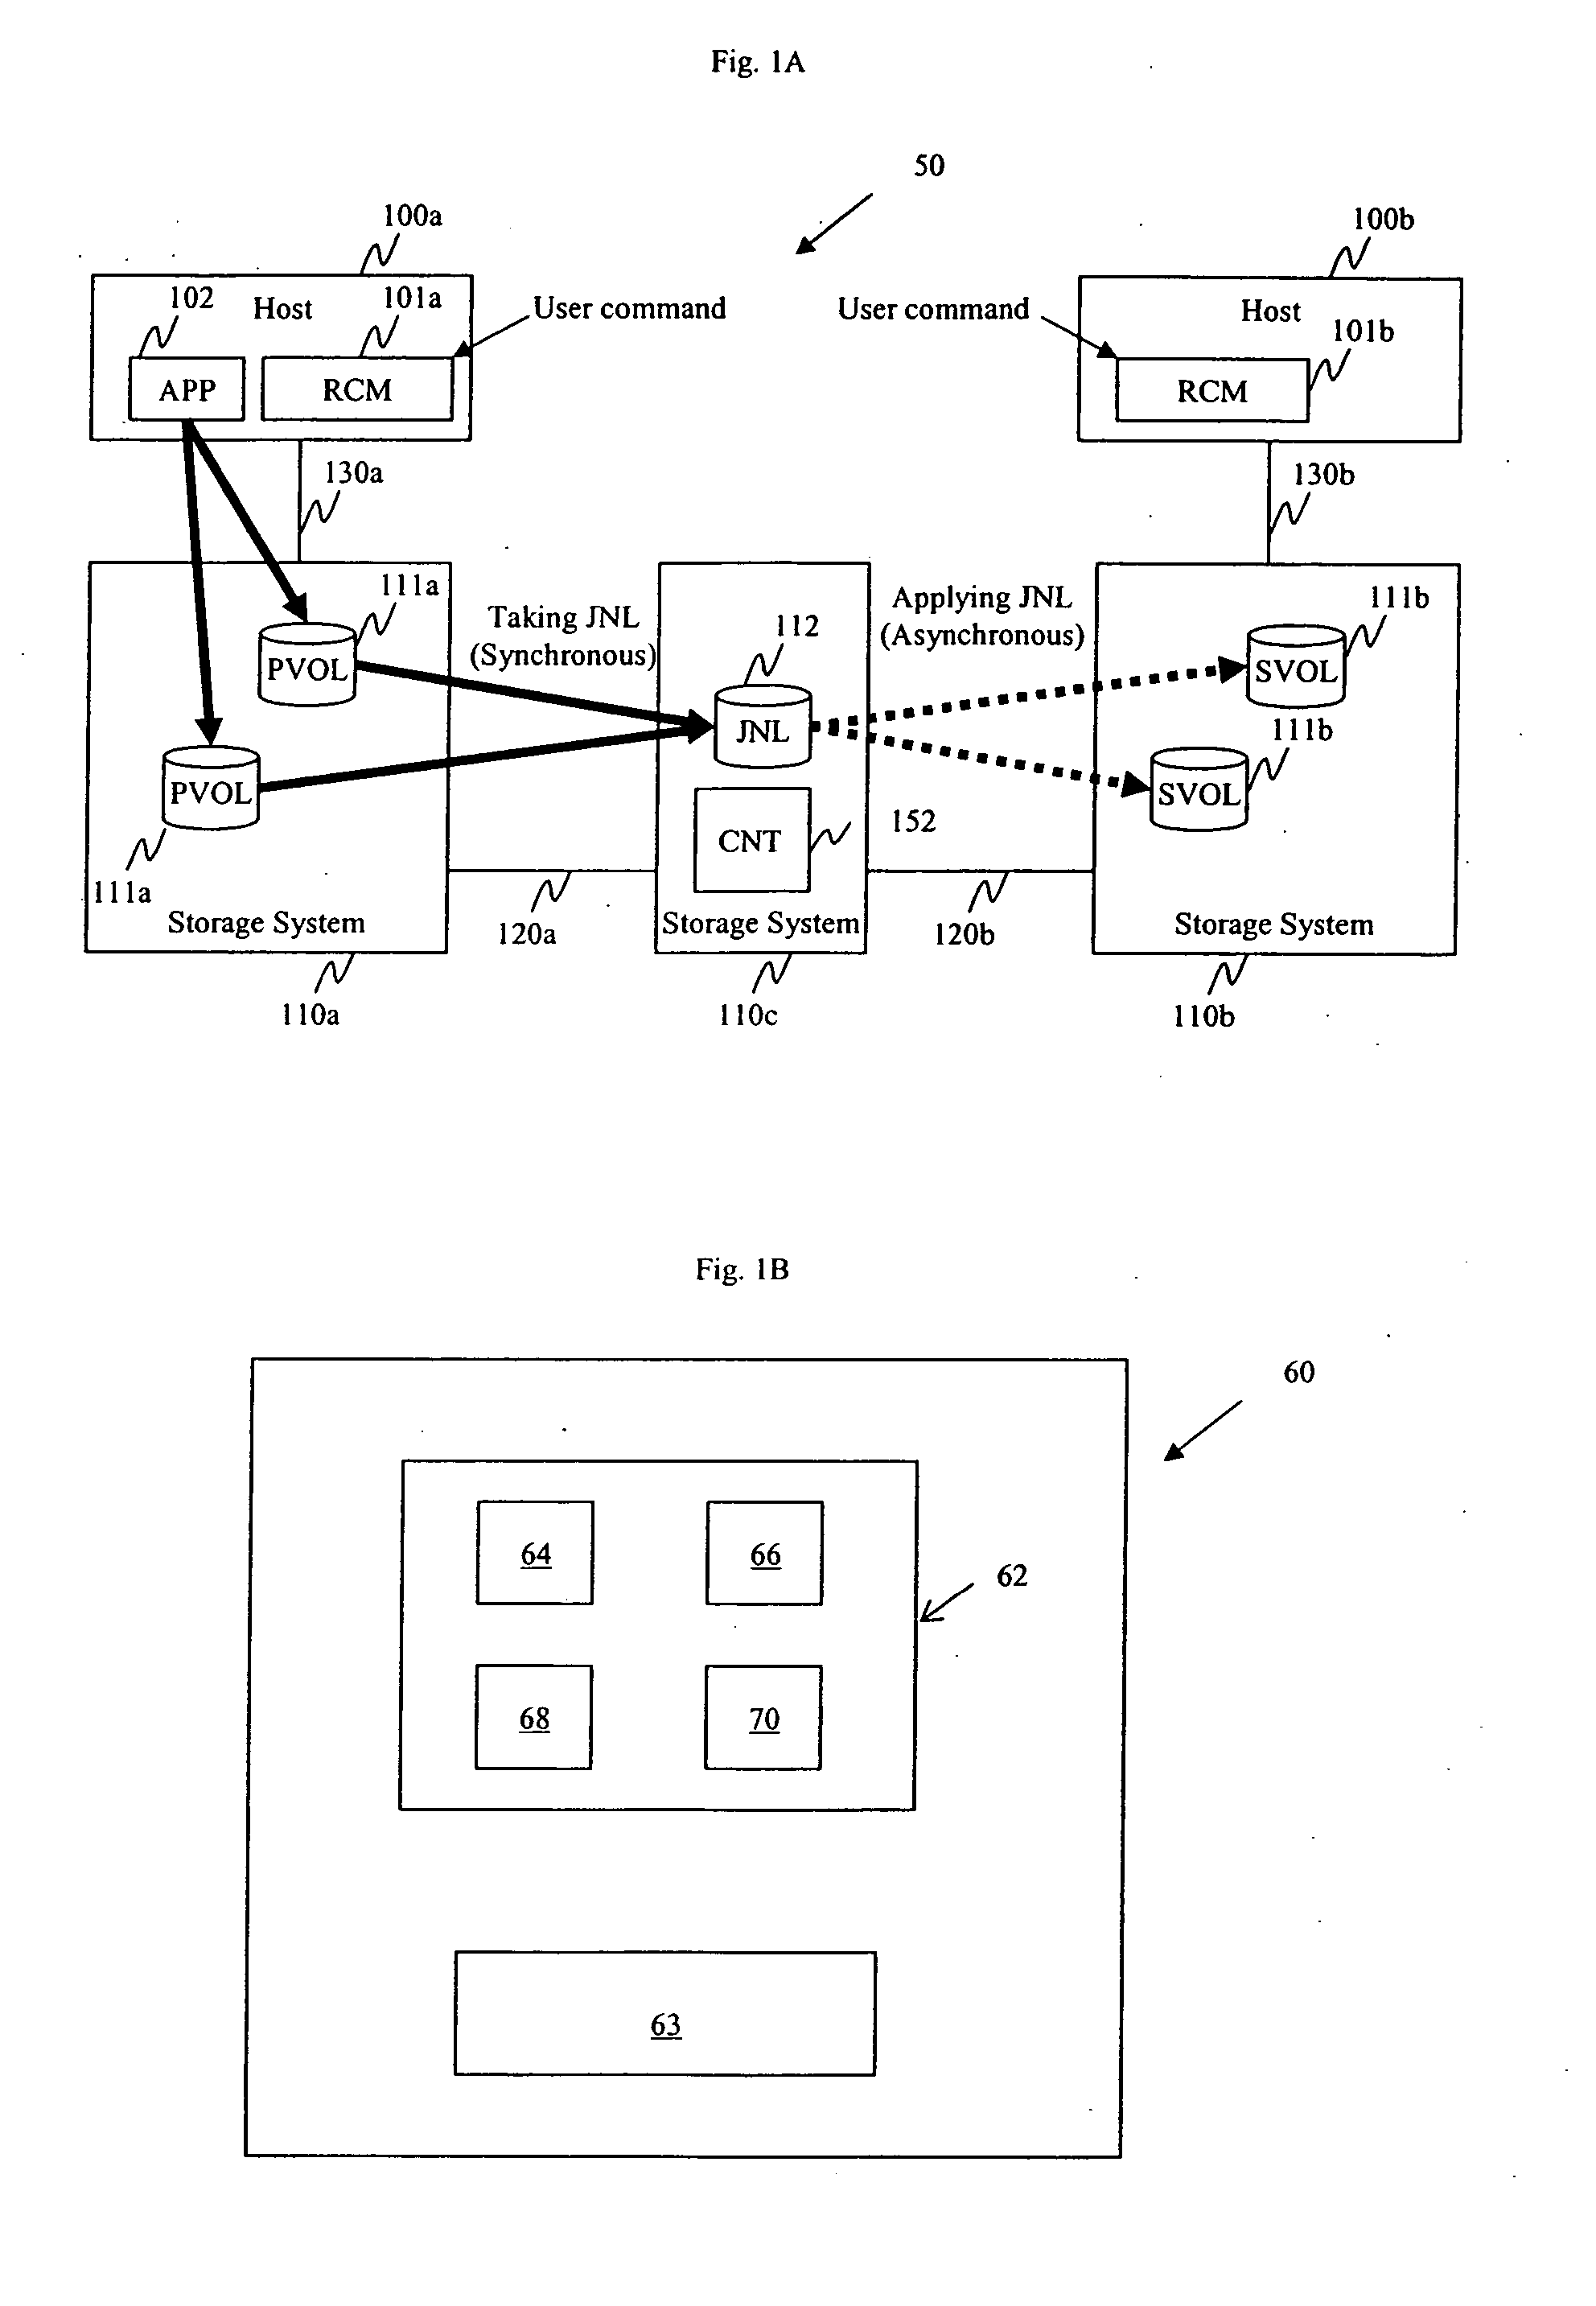 Remote copy system having multiple data centers